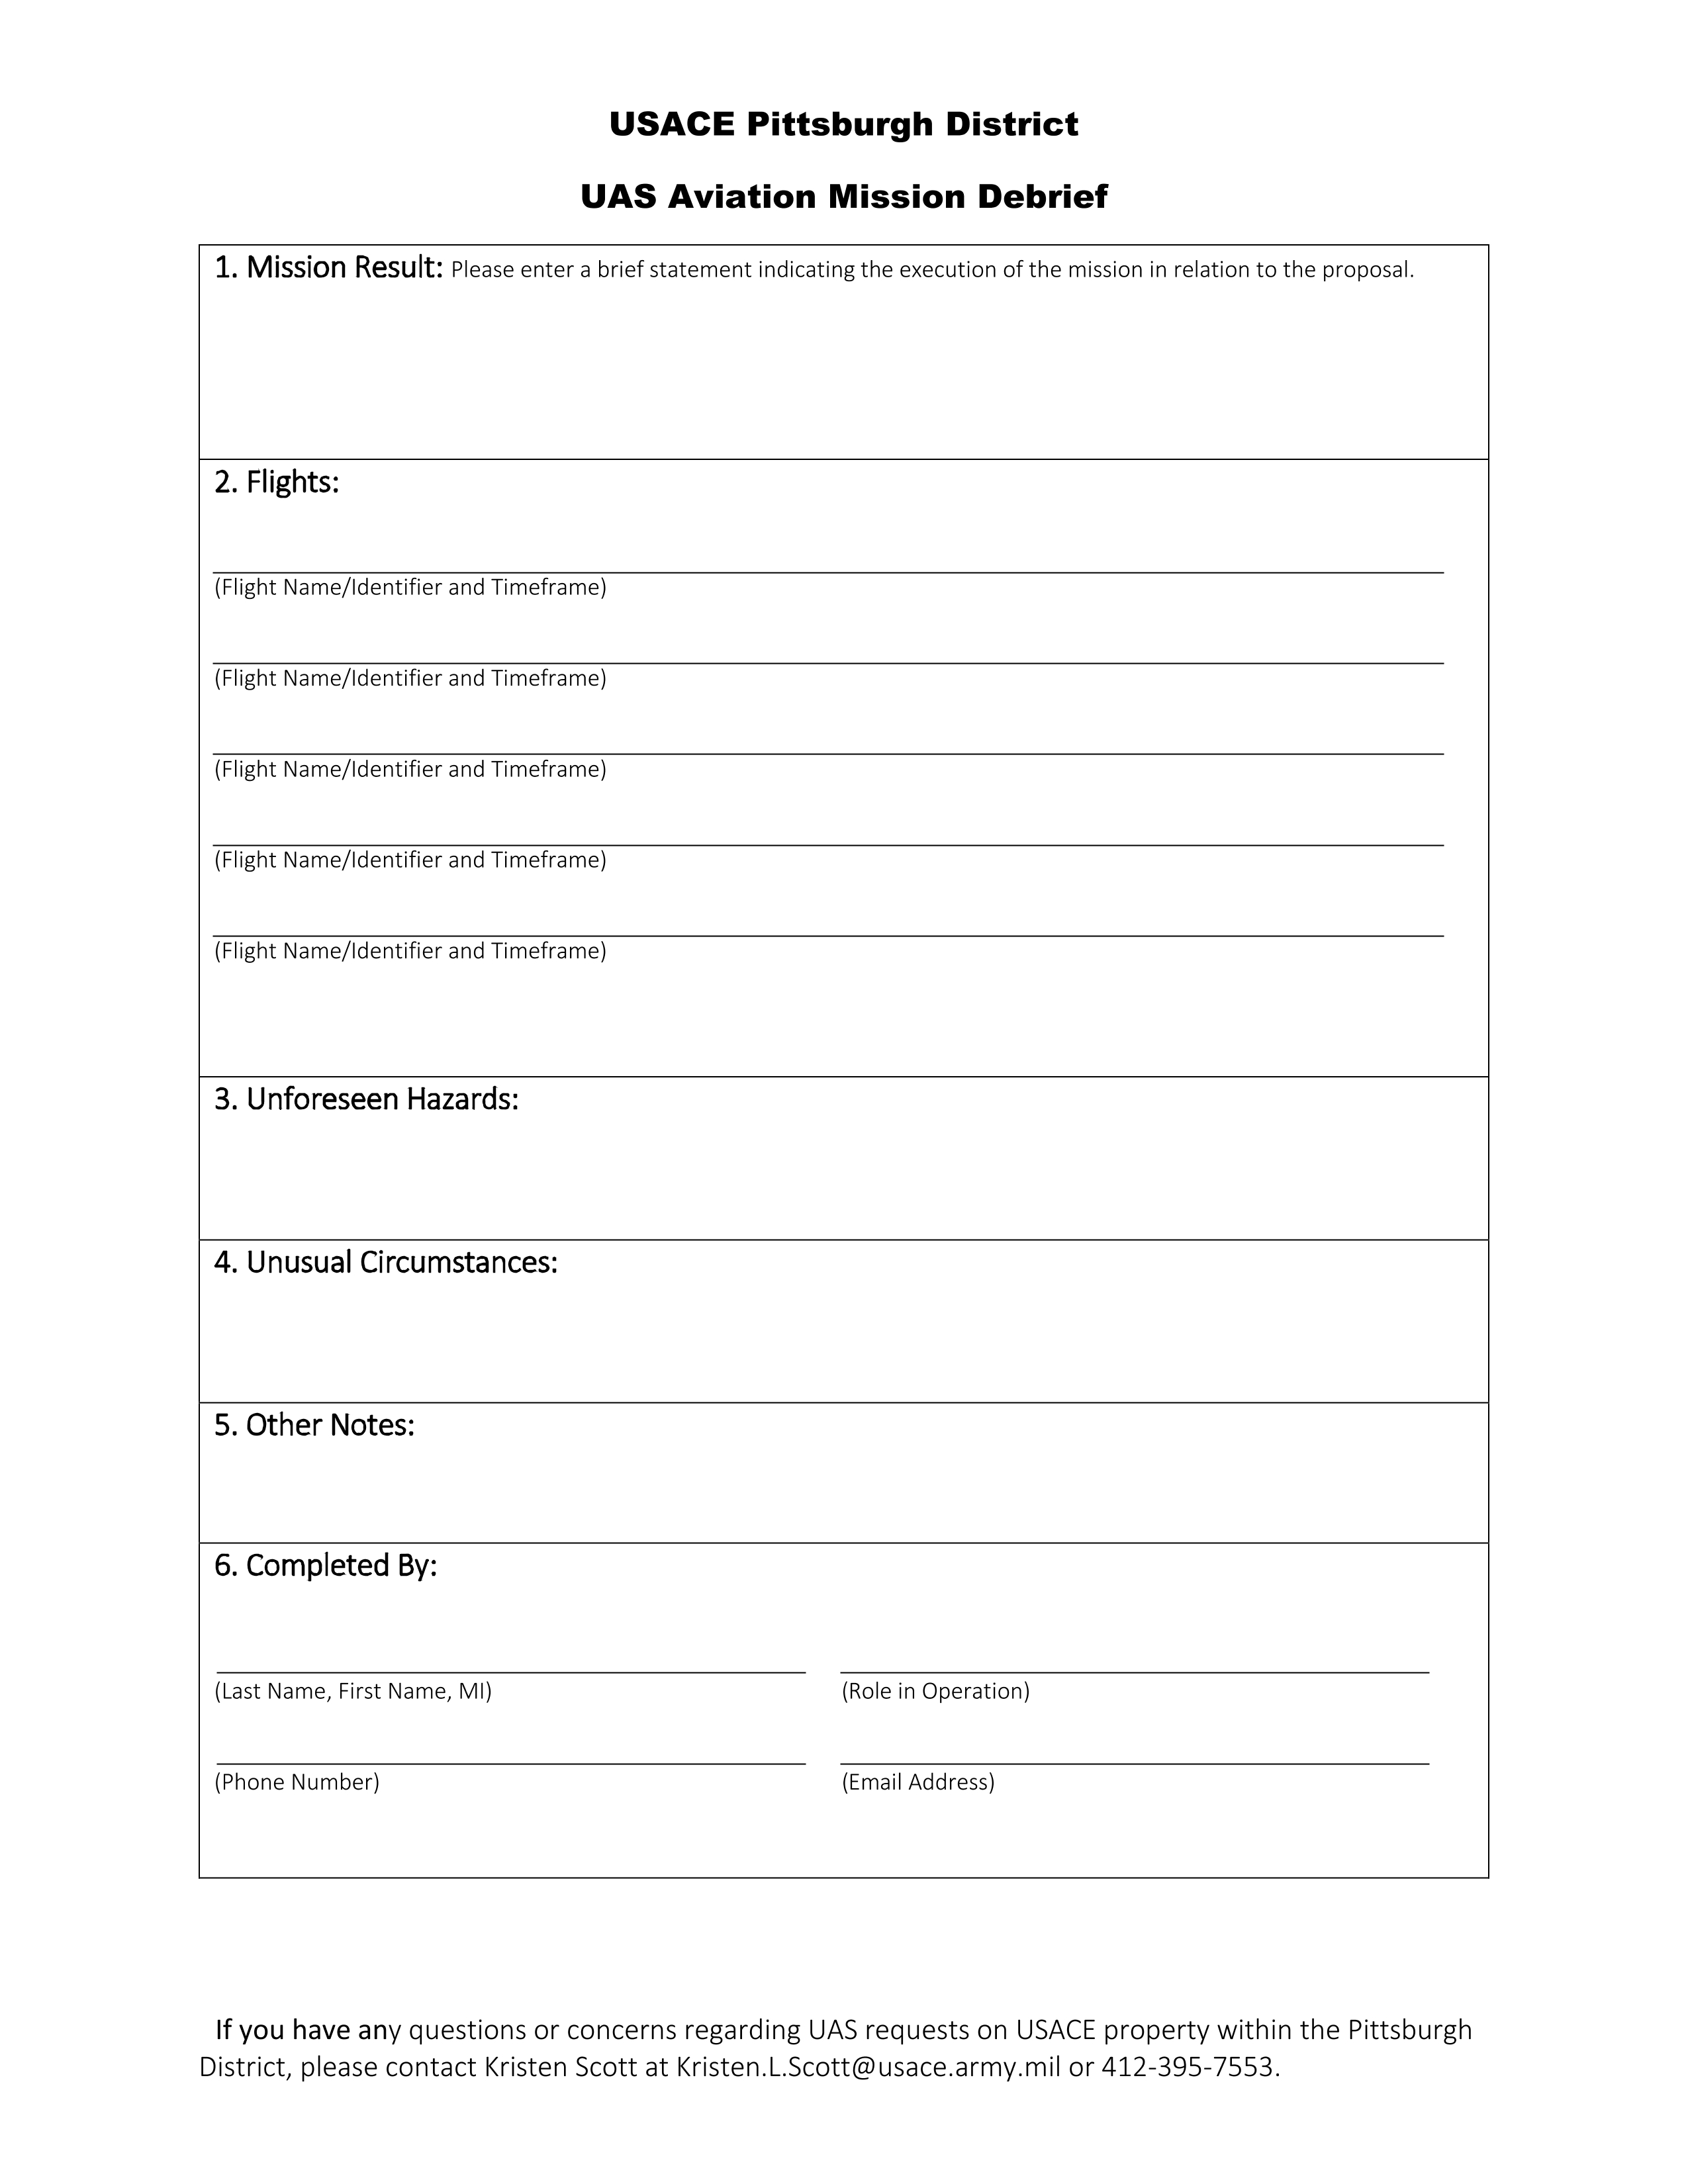 Request Form